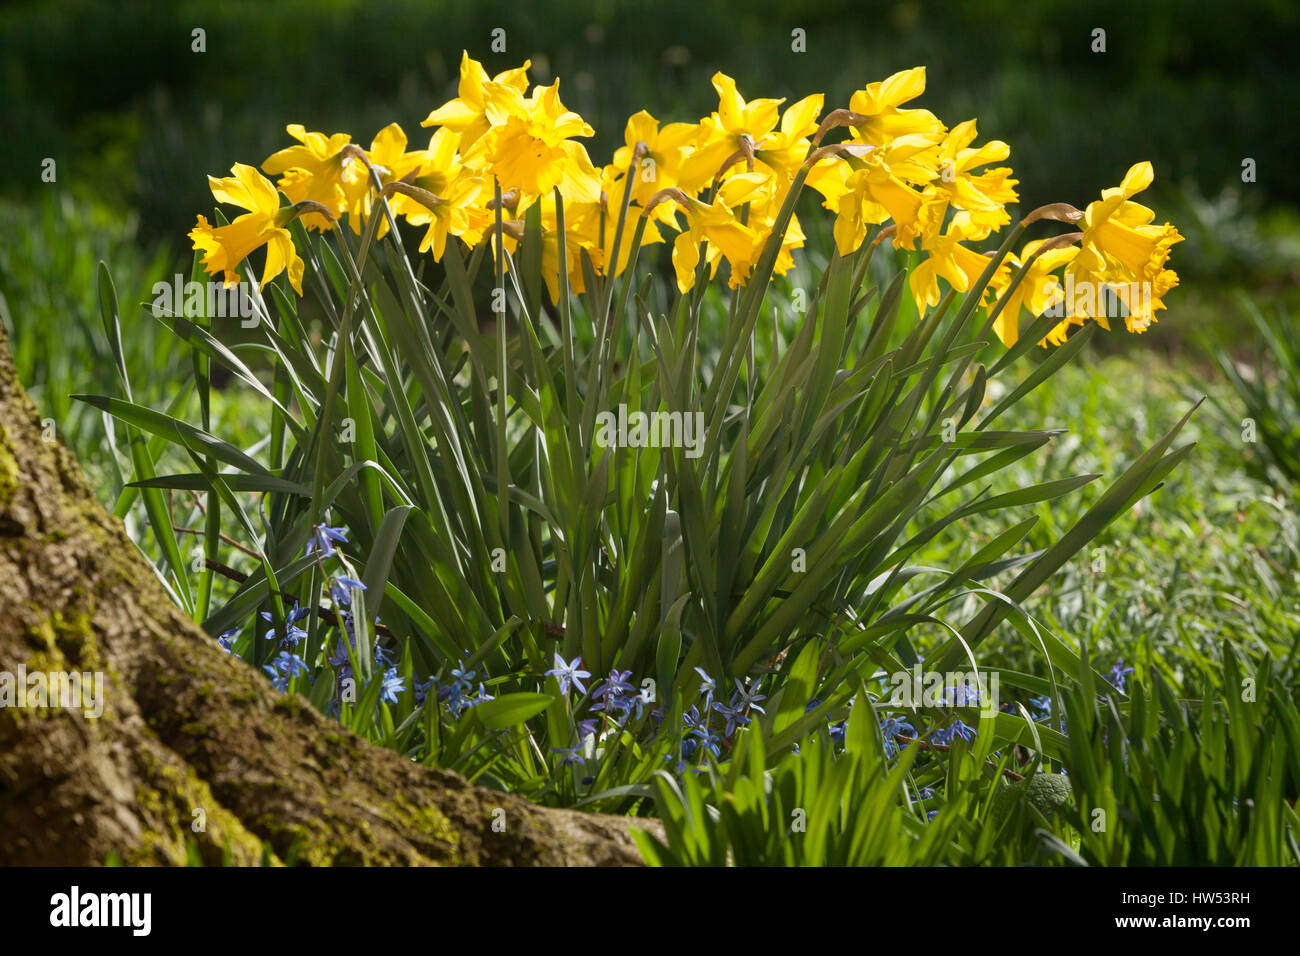 Daffodils at Elsham Hall Gardens and Country Park. Elsham, North Lincolnshire, UK. Spring, 15th March 2017. Stock Photo